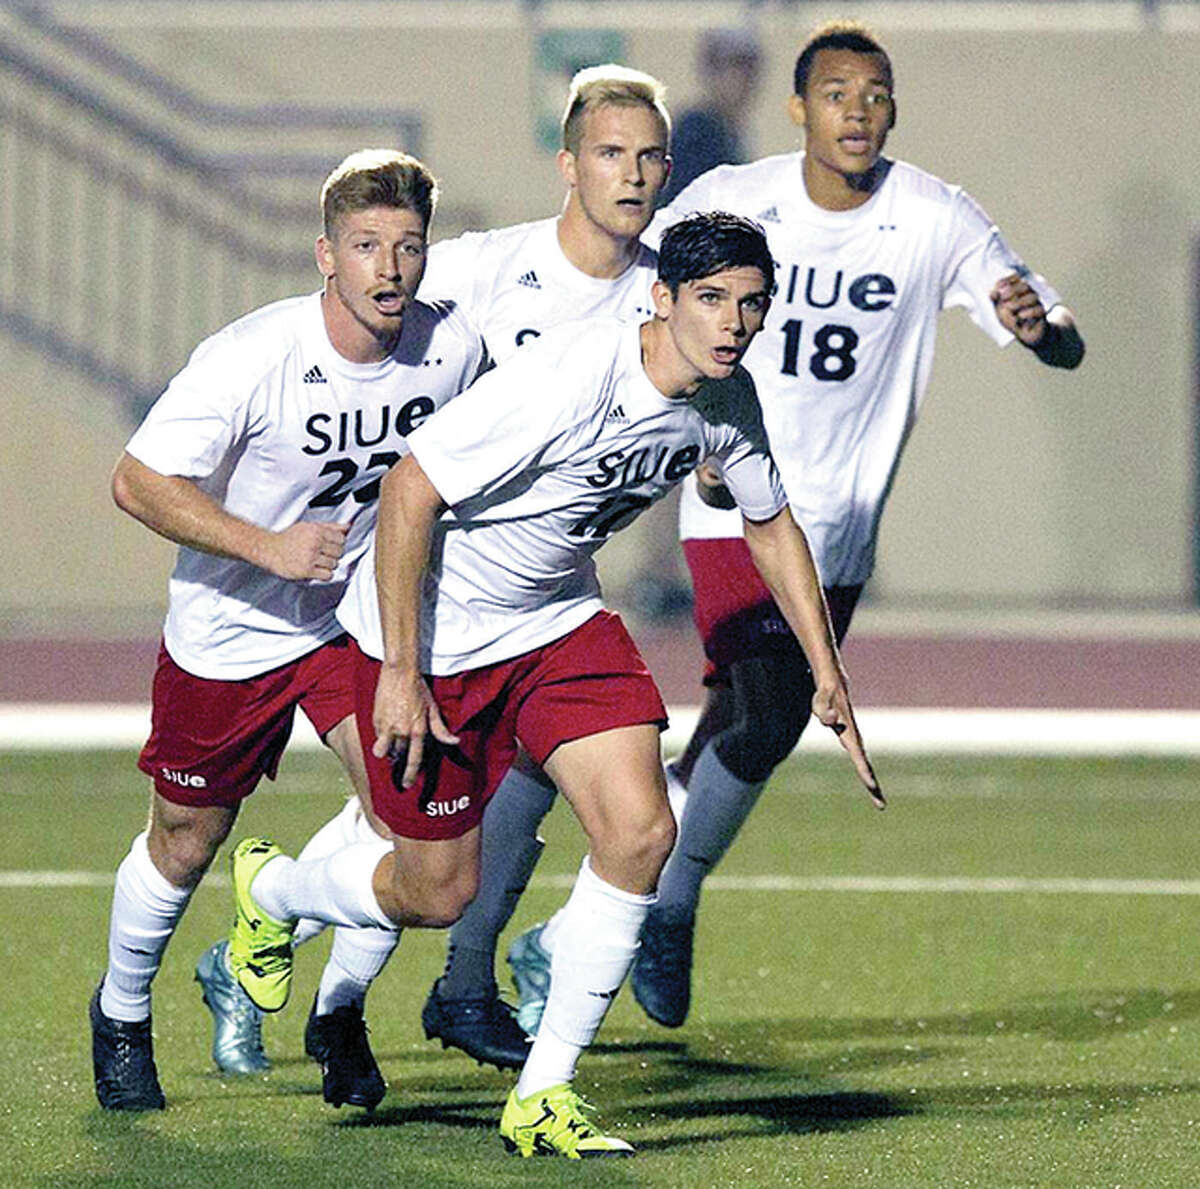 From left, SIUE’s Brett Lane (22), Austin Ledbetter (back), Paul Scheipeter (17) and Devyn Jambga keep their eyes on a corner kick in a recent Cougars game at Korte Stadium. SIUE will face Loyola at 6 p.m. Friday in a semifinal game of the Missouri Valley Conference Tournament at Korte Stadium. The winner will advance to Sunday afternoon’s championship match.